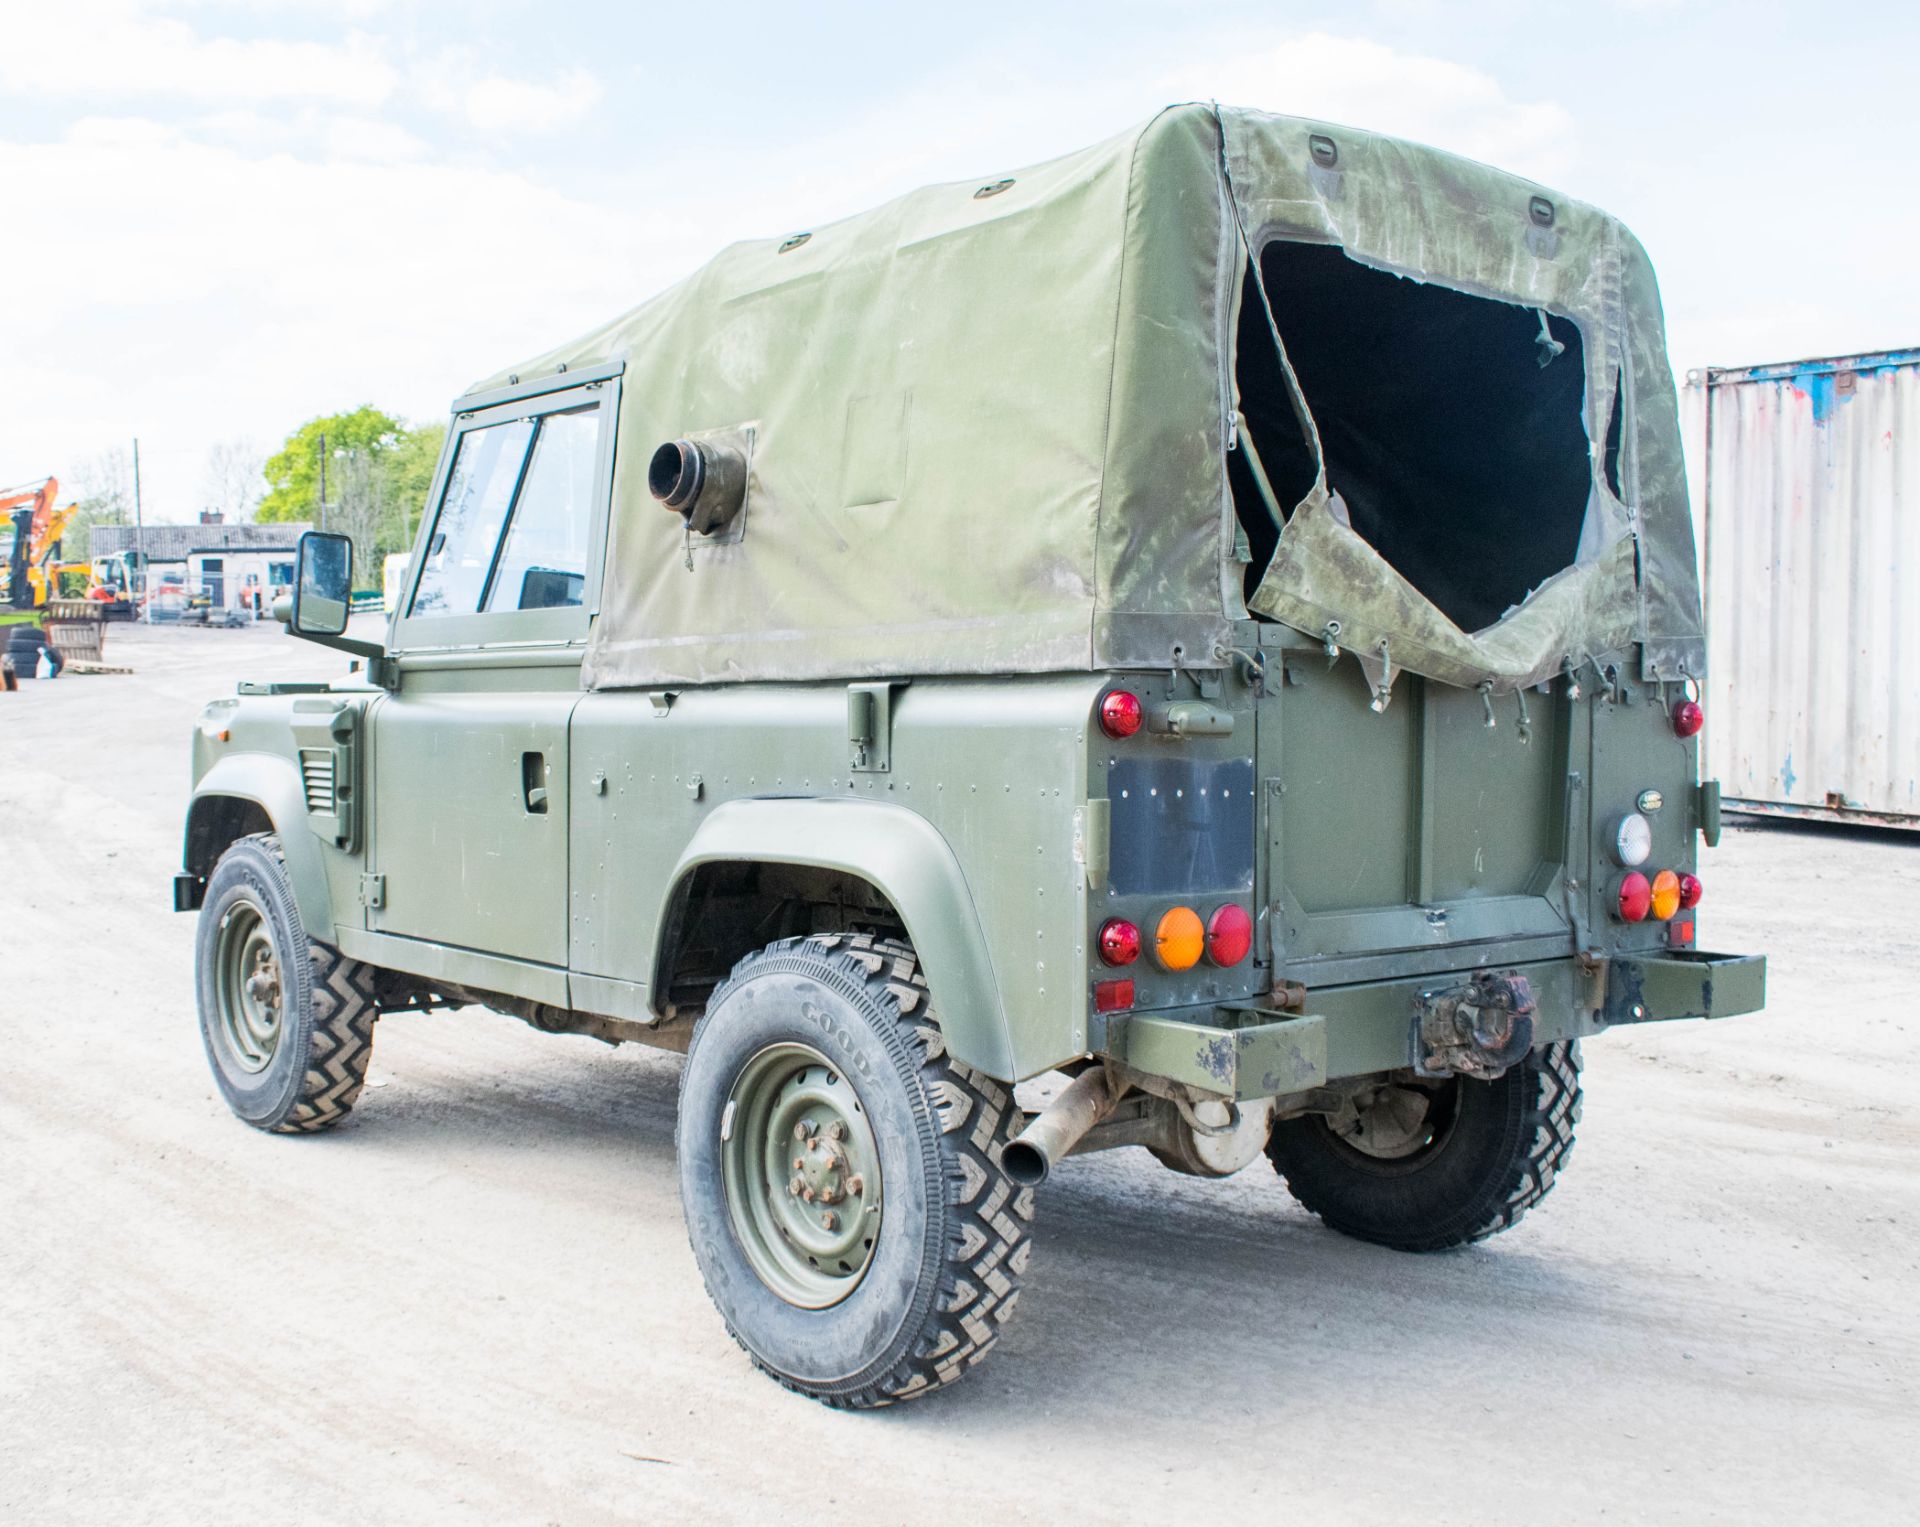 Land Rover Defender 90 Wolf 300 TDI 4wd soft top utility vehicle (EX MOD) Date into Service: 02/03/ - Image 4 of 21